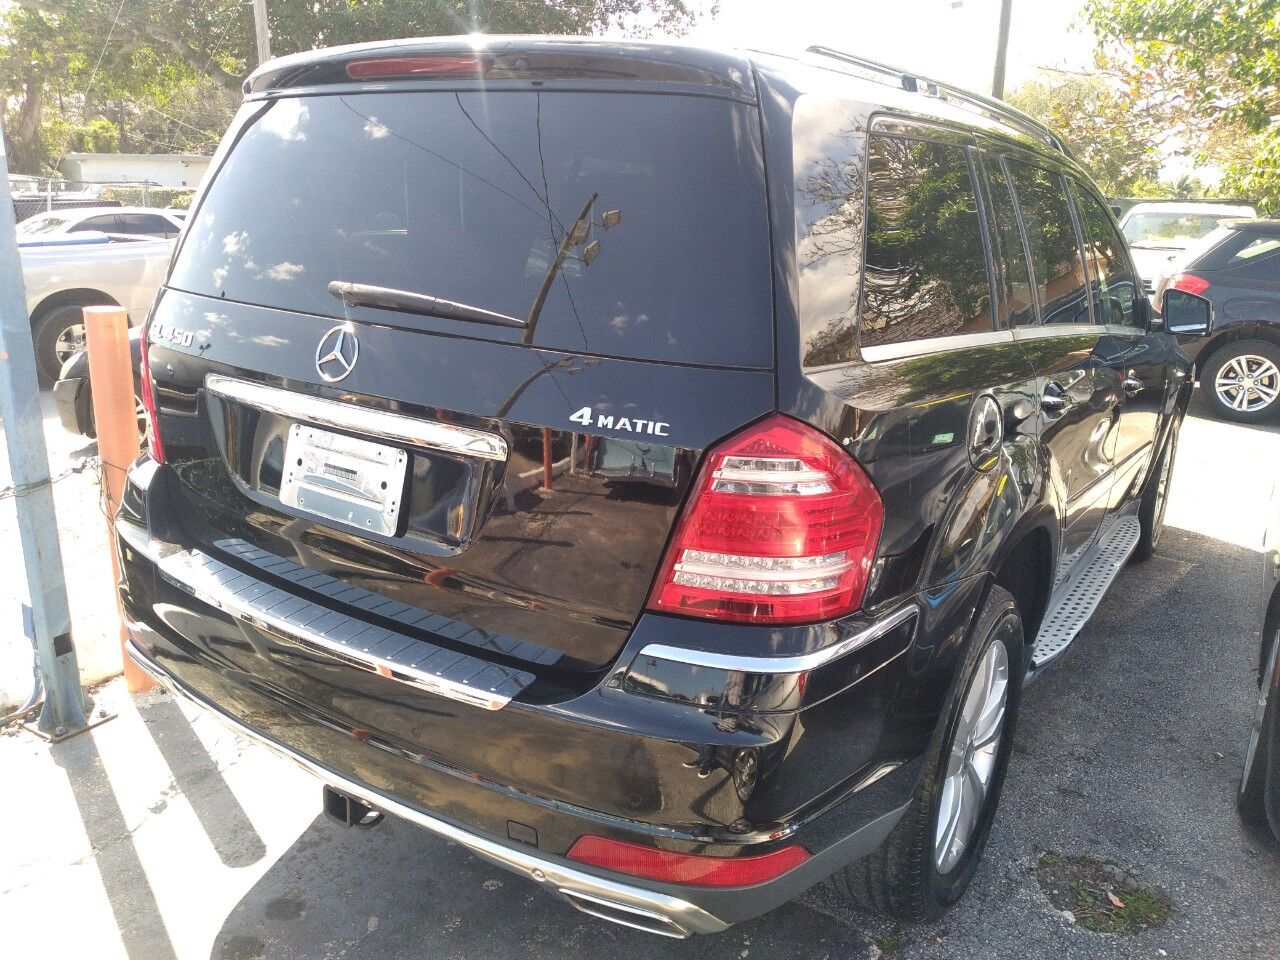 2012 MERCEDES-BENZ GL-Class SUV / Crossover - $10,999